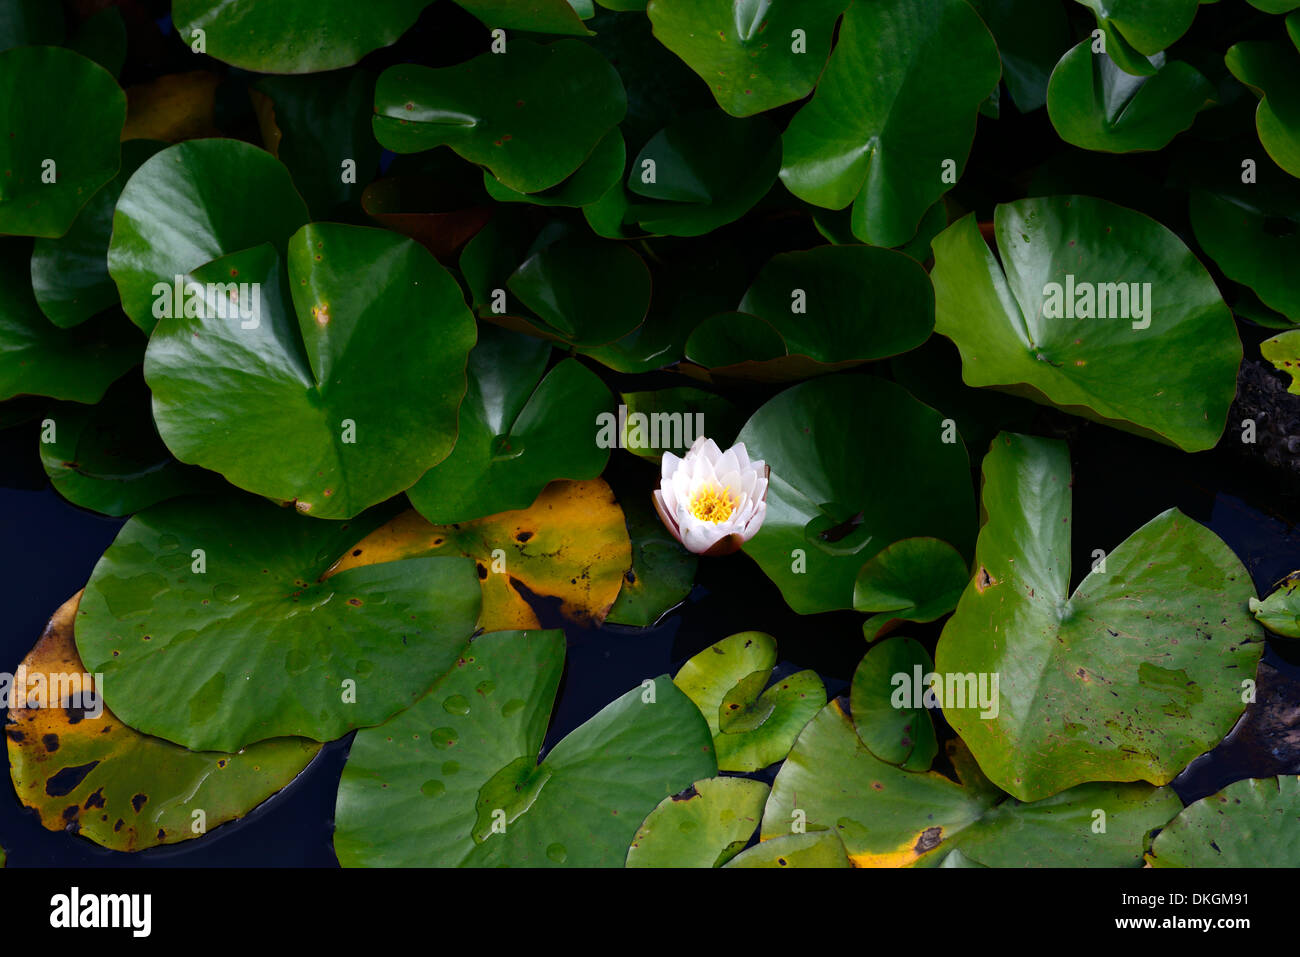 single white waterlily flower among green leaves pads pond pool Stock Photo